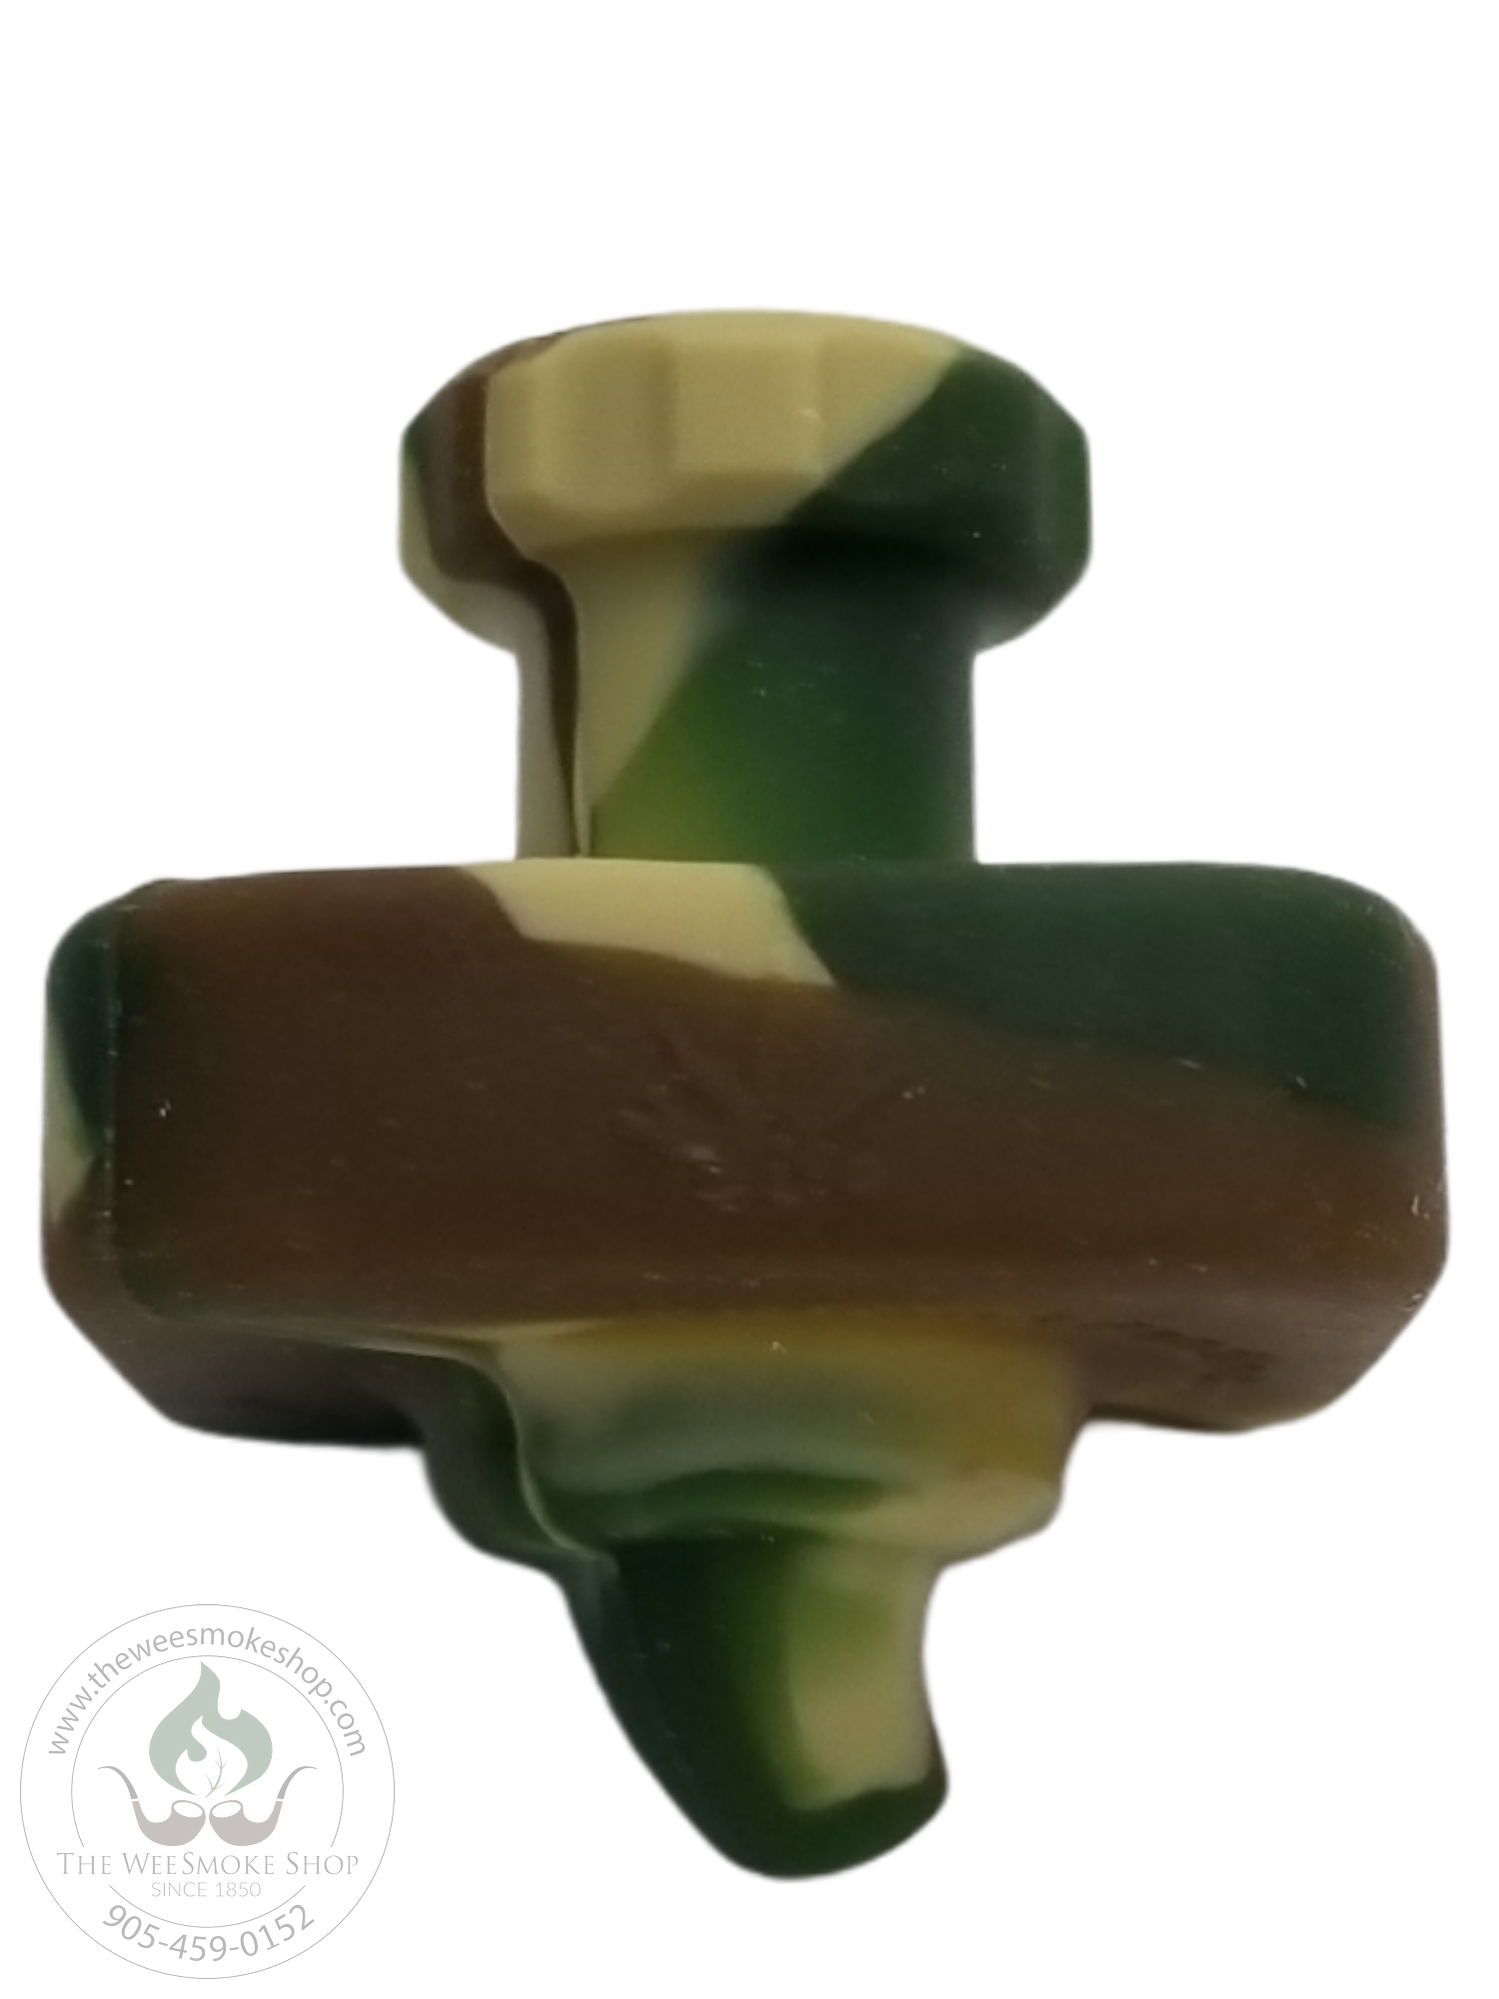 Camo-Directional Silicone Carb Cap-Dab Accessories-The Wee Smoke Shop